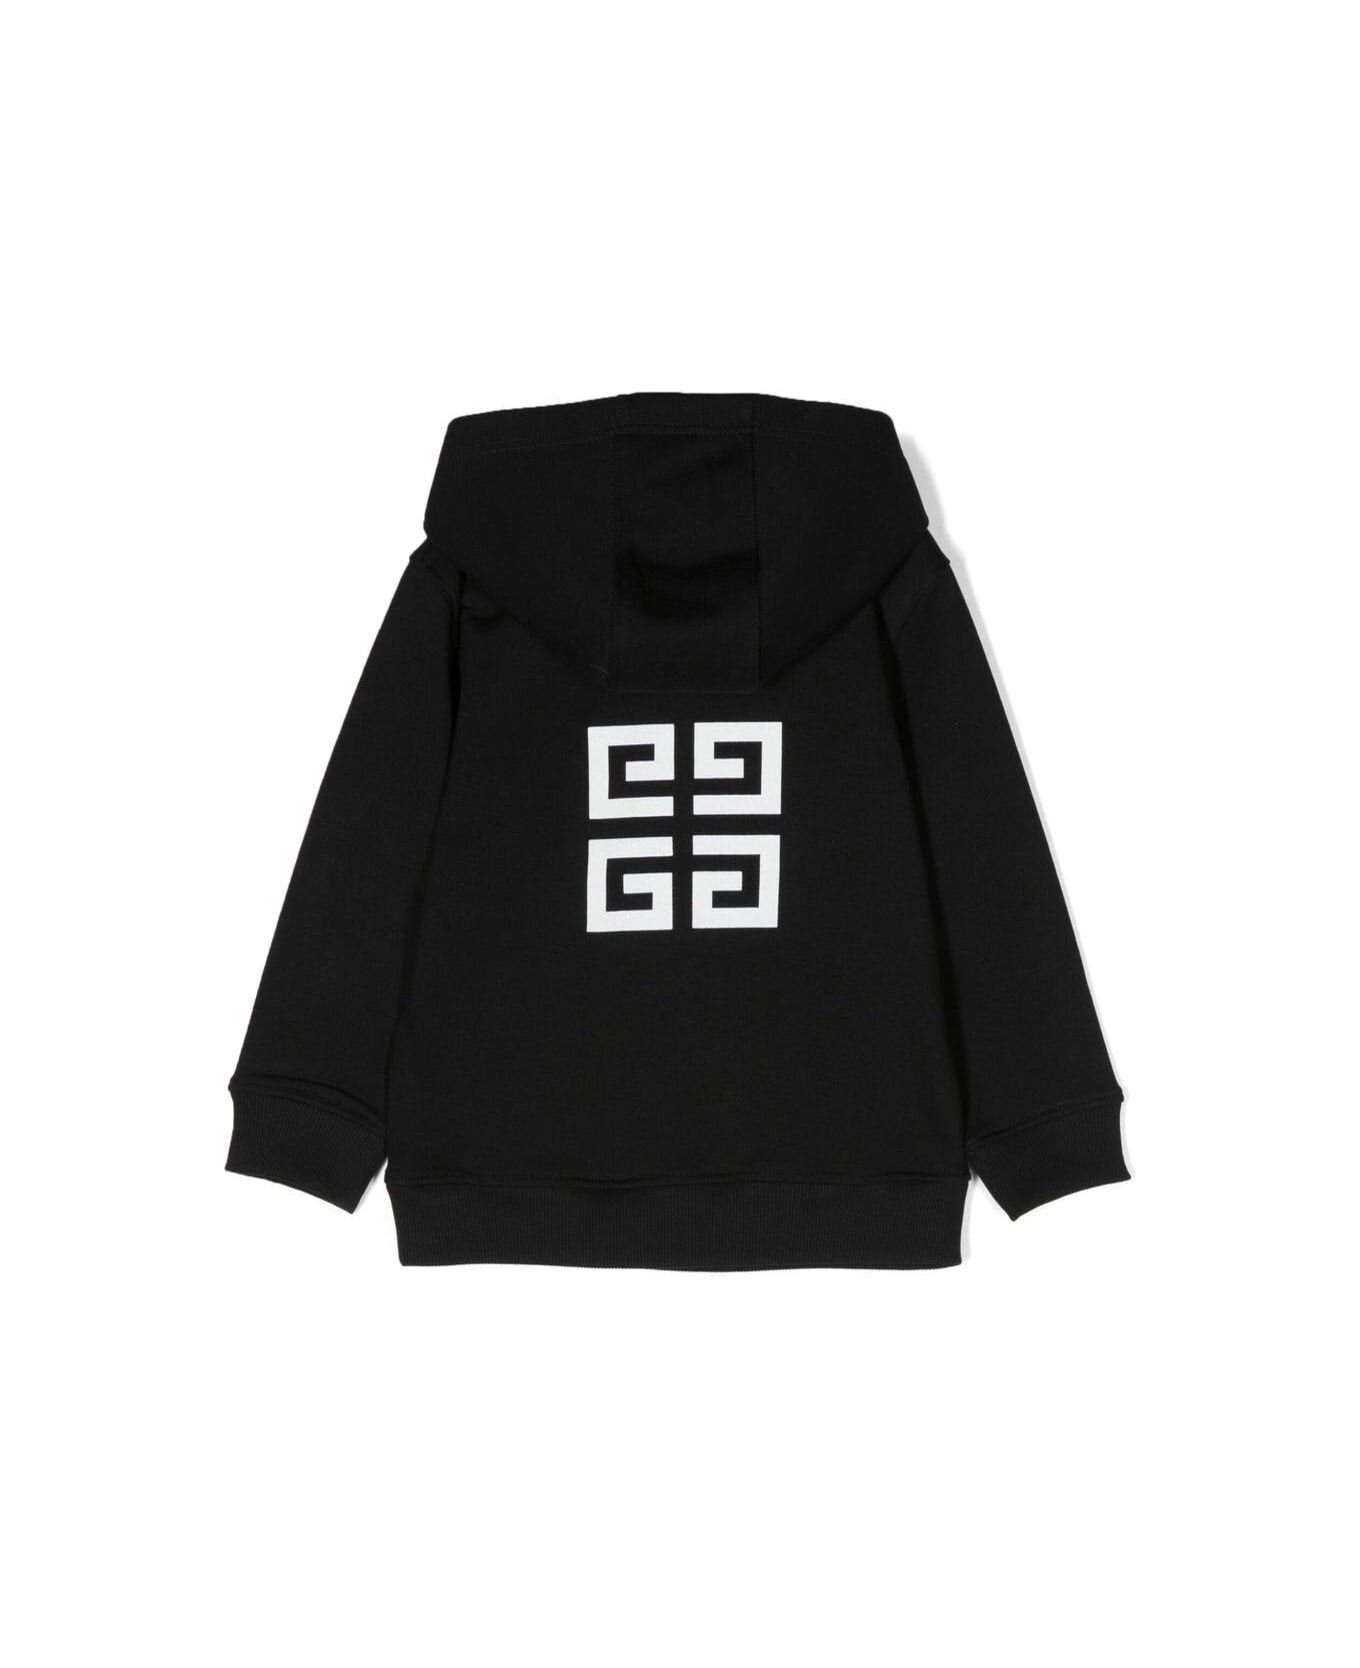 Givenchy Black Hooded Sweatshirt With Printed Logo In Cotton Blend Boy - Black